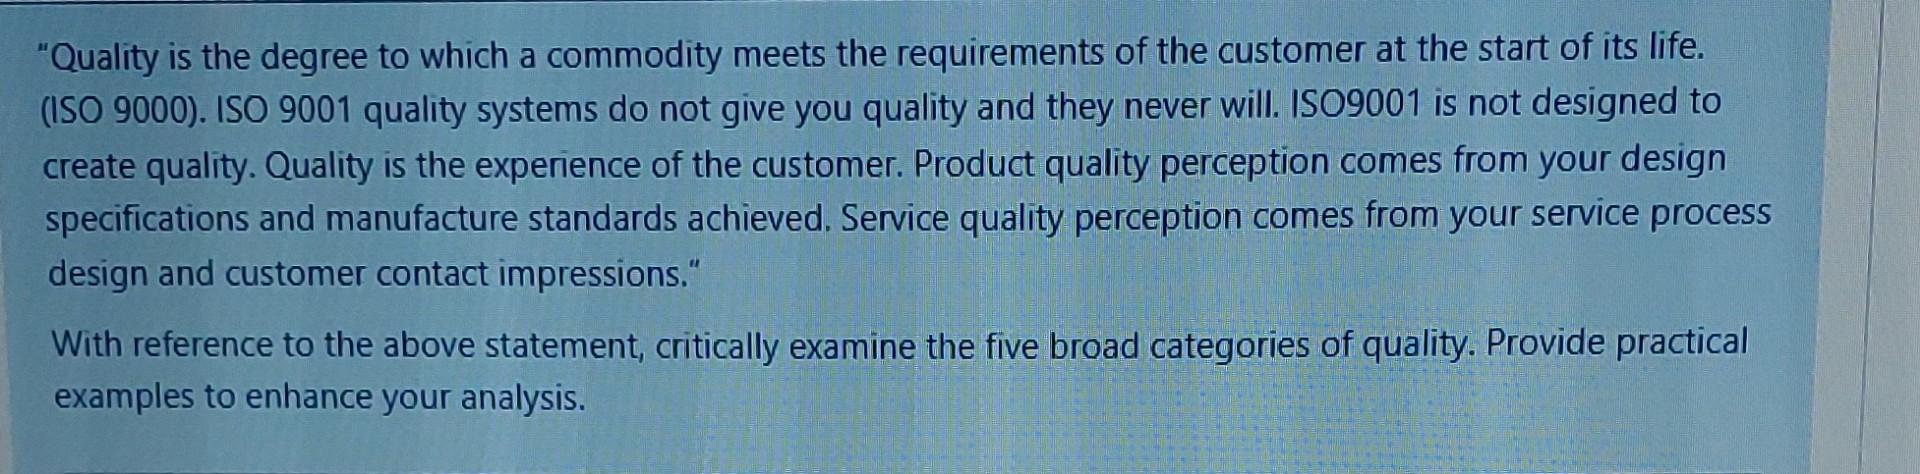 "Quality is the degree to which a commodity meets the requirements of the customer at the start of its life.